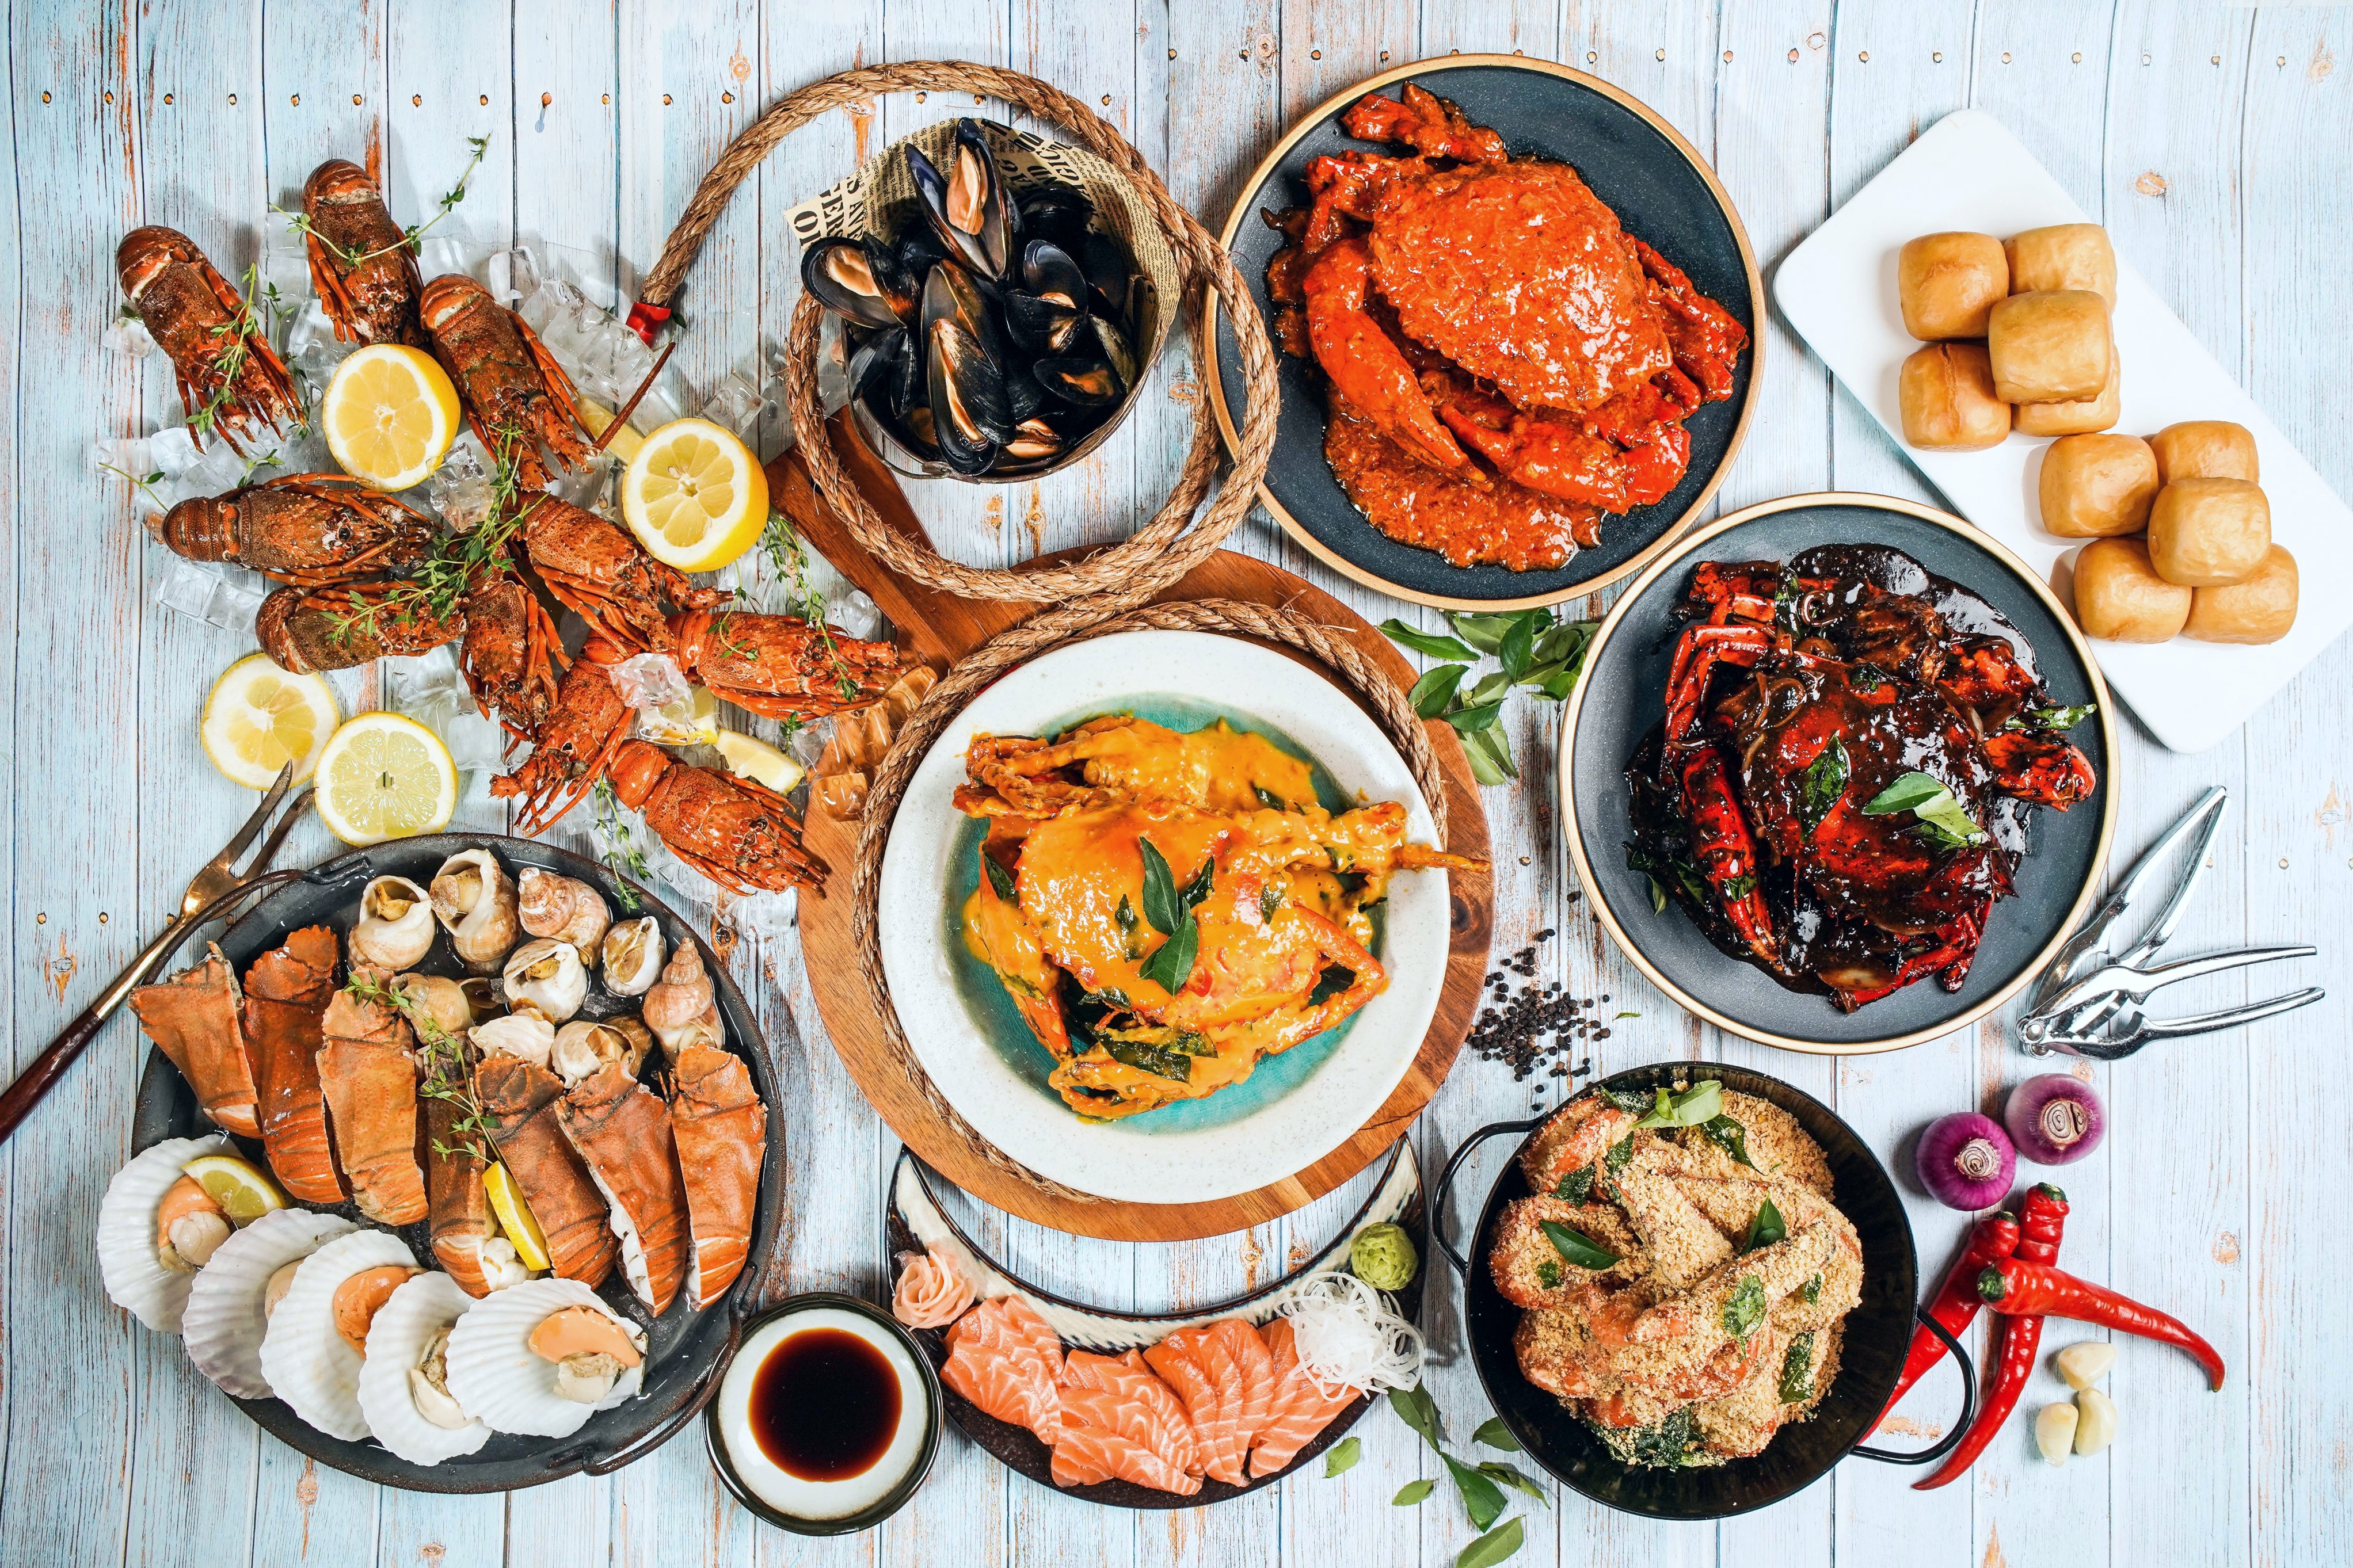 Weekend Seafood Buffet at Spice Brasserie